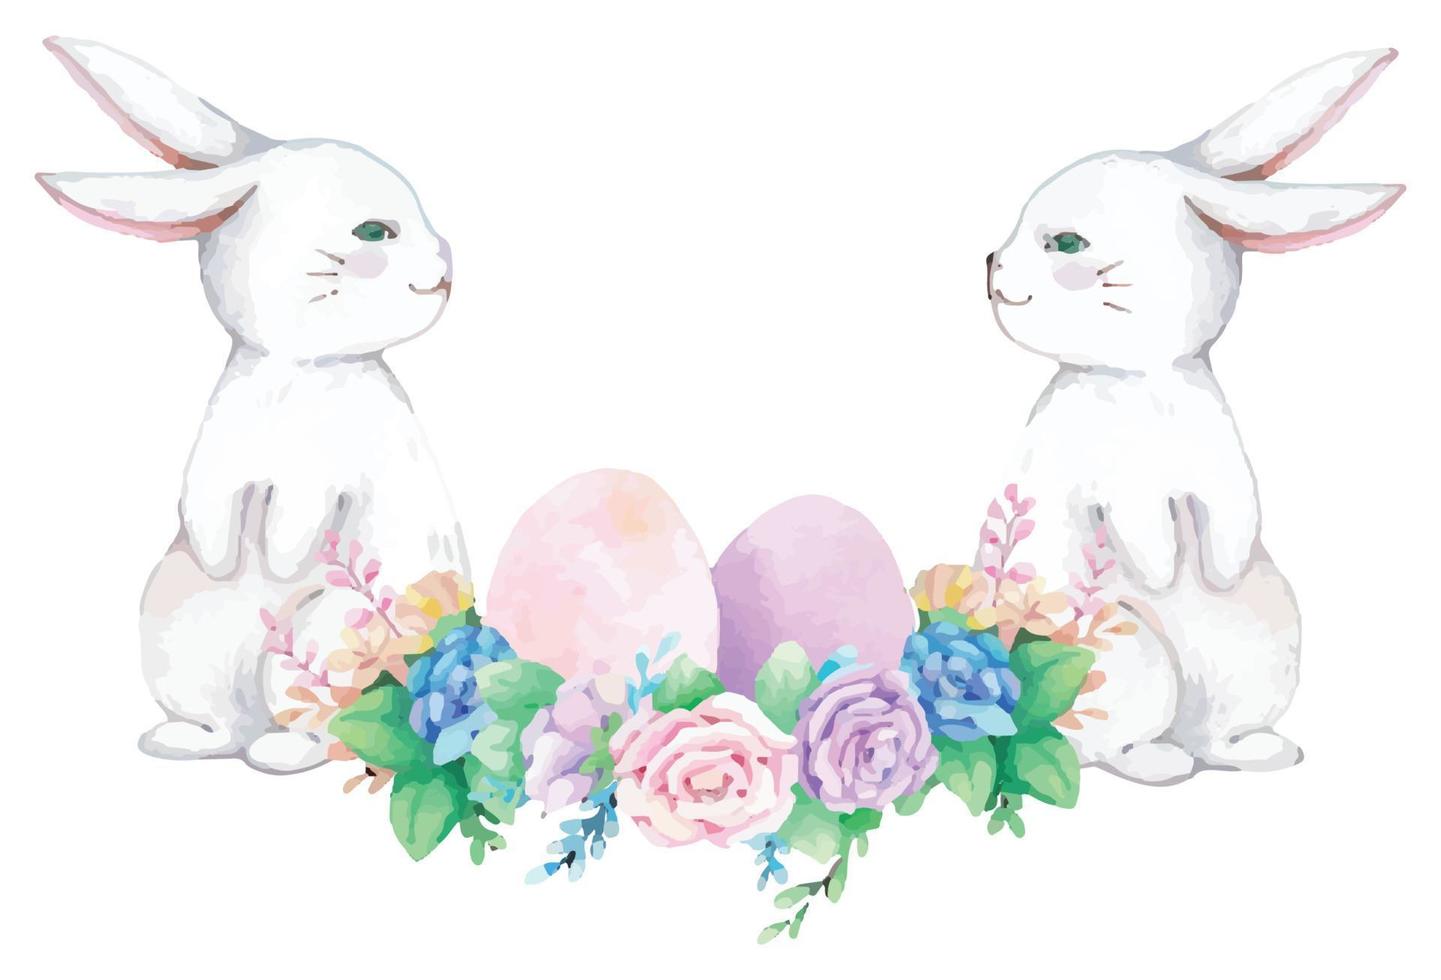 Hand drawn watercolor happy easter for design. Vector illustration.